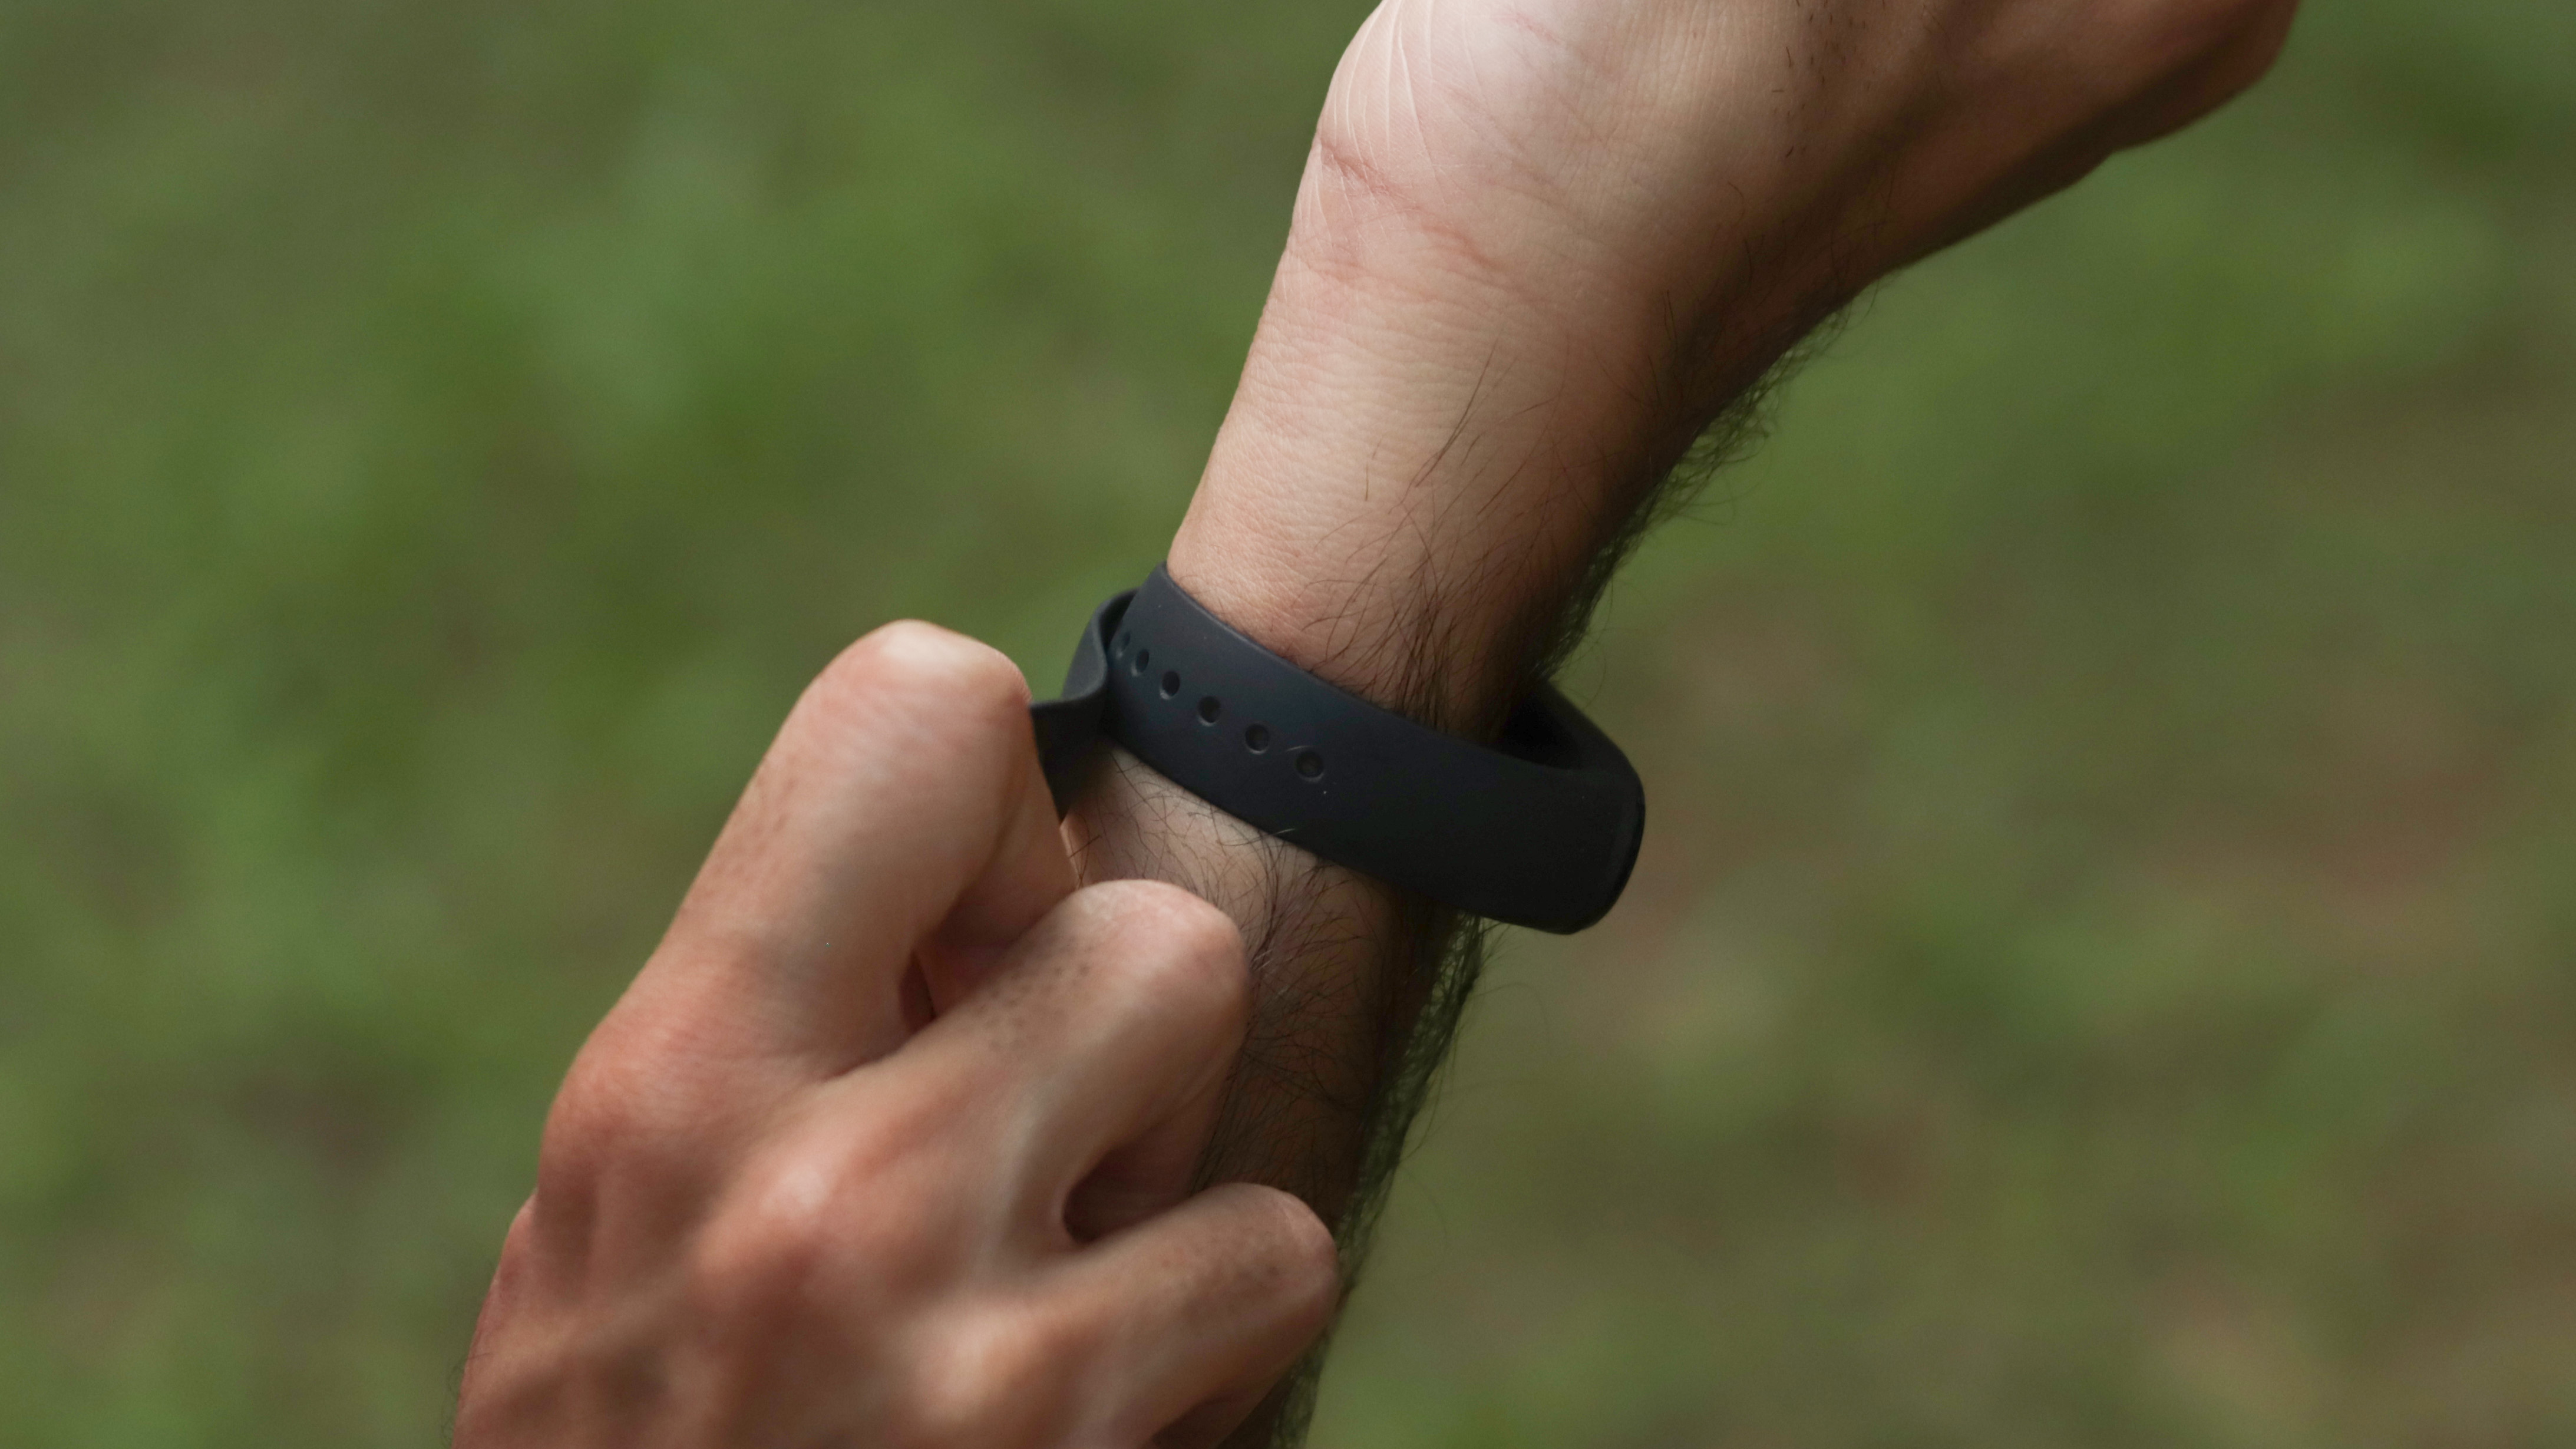 OnePlus Band price in India, launch date and features